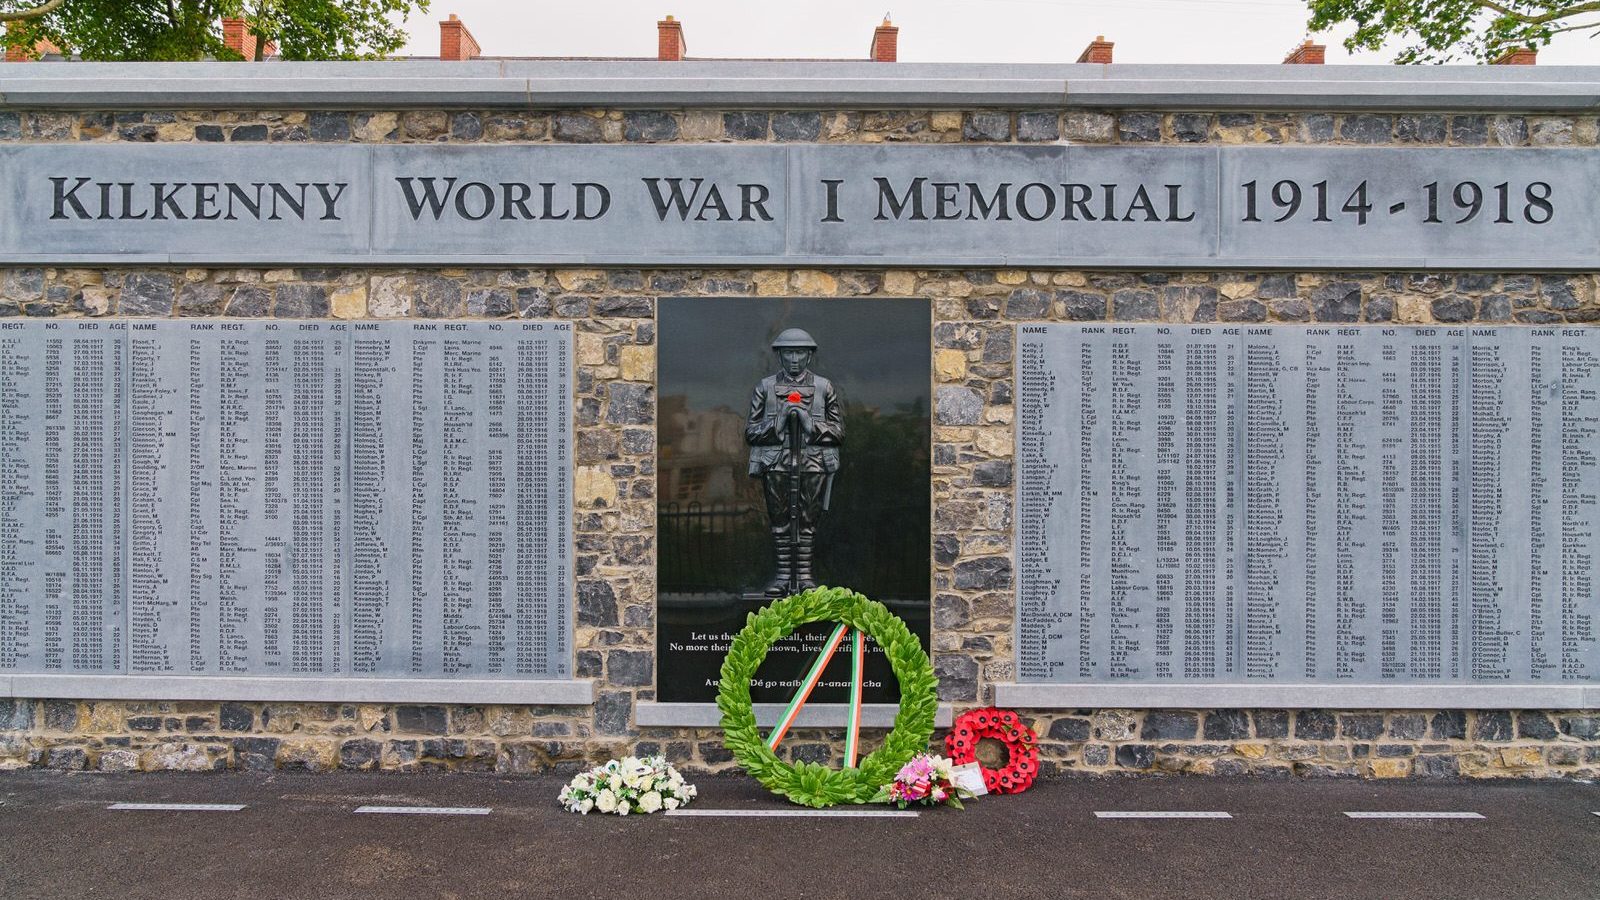 THE FIRST WORLD WAR MEMORIAL UNVEILED IN 2018 AT THE PEACE PARK IN KILKENNY [ALSO THE STORY OF 14 YEAR OLD THOMAS WOODGATE]-226809-1